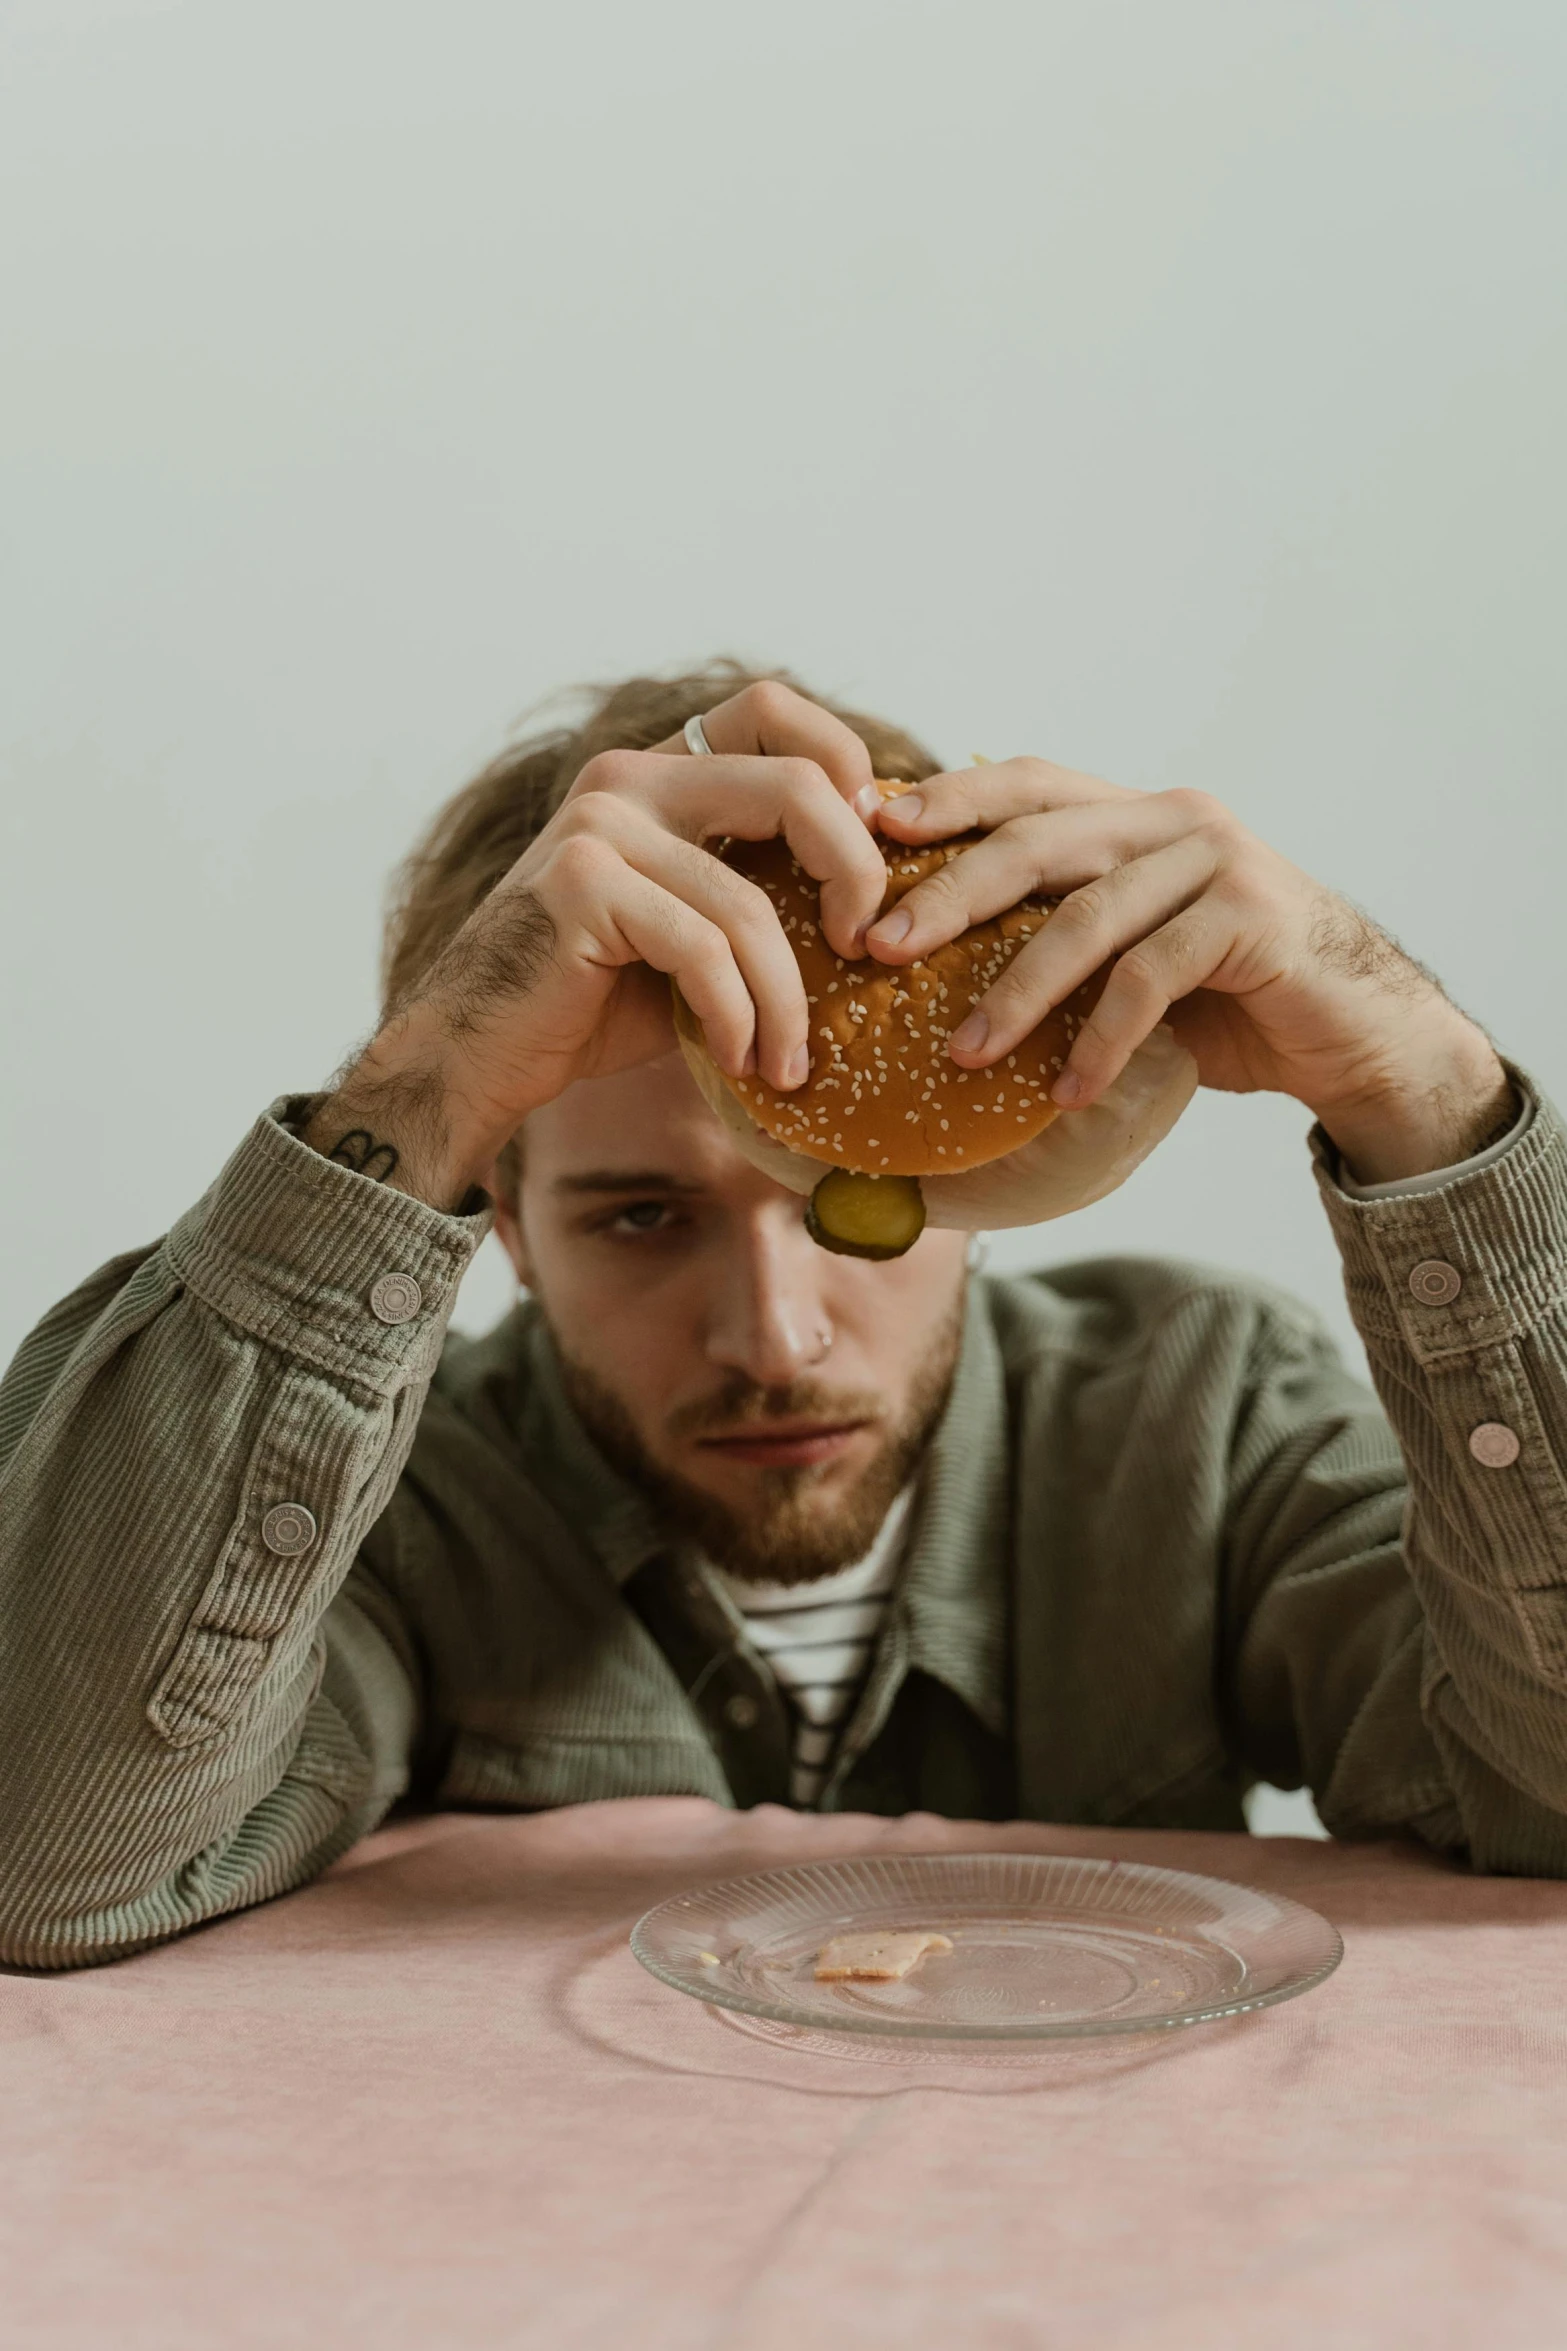 a man sitting at a table with a hamburger in front of him, by Adam Marczyński, trending on pexels, a photo of a disheveled man, on a pale background, depressed mood, hozier